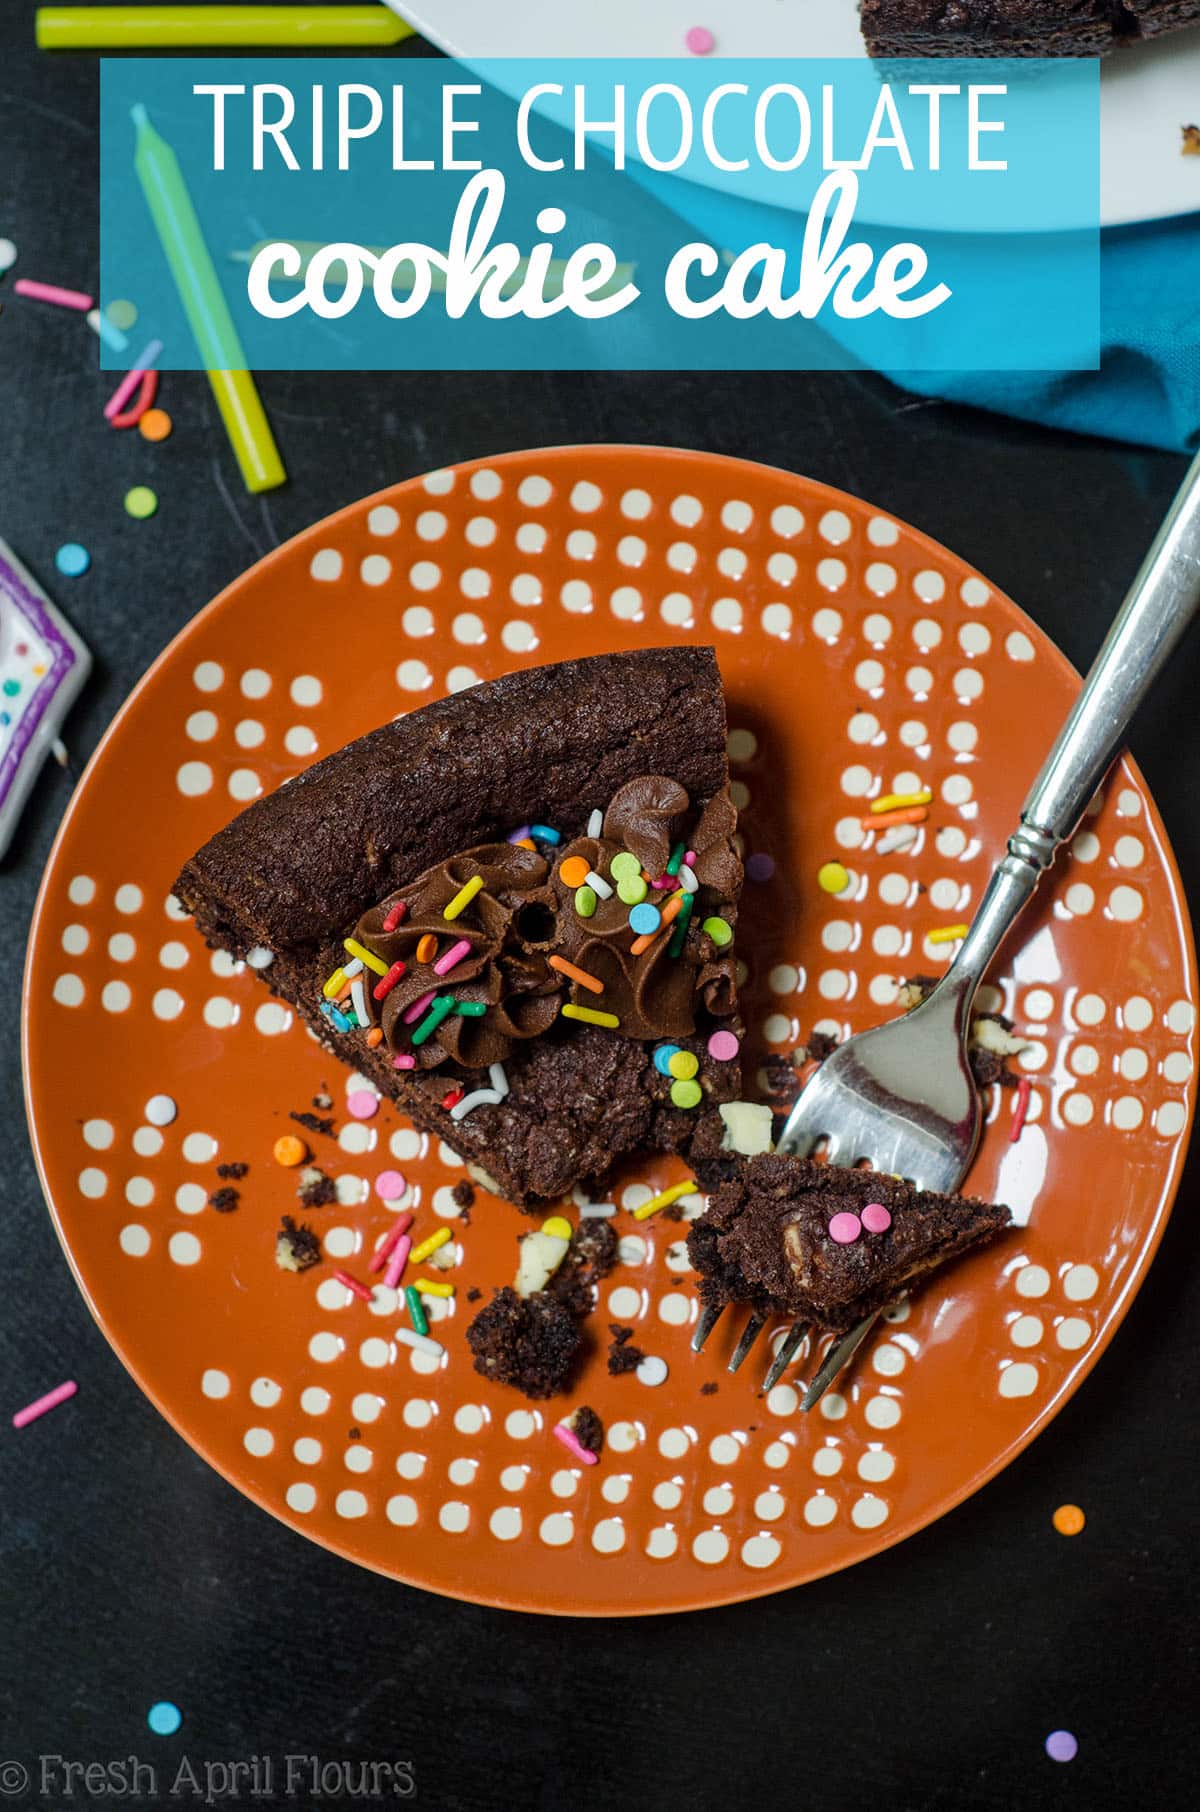 Triple Chocolate Cookie Cake: Dark chocolate cookie cake filled with creamy white chocolate chips and topped with a chocolate fudge frosting. via @frshaprilflours